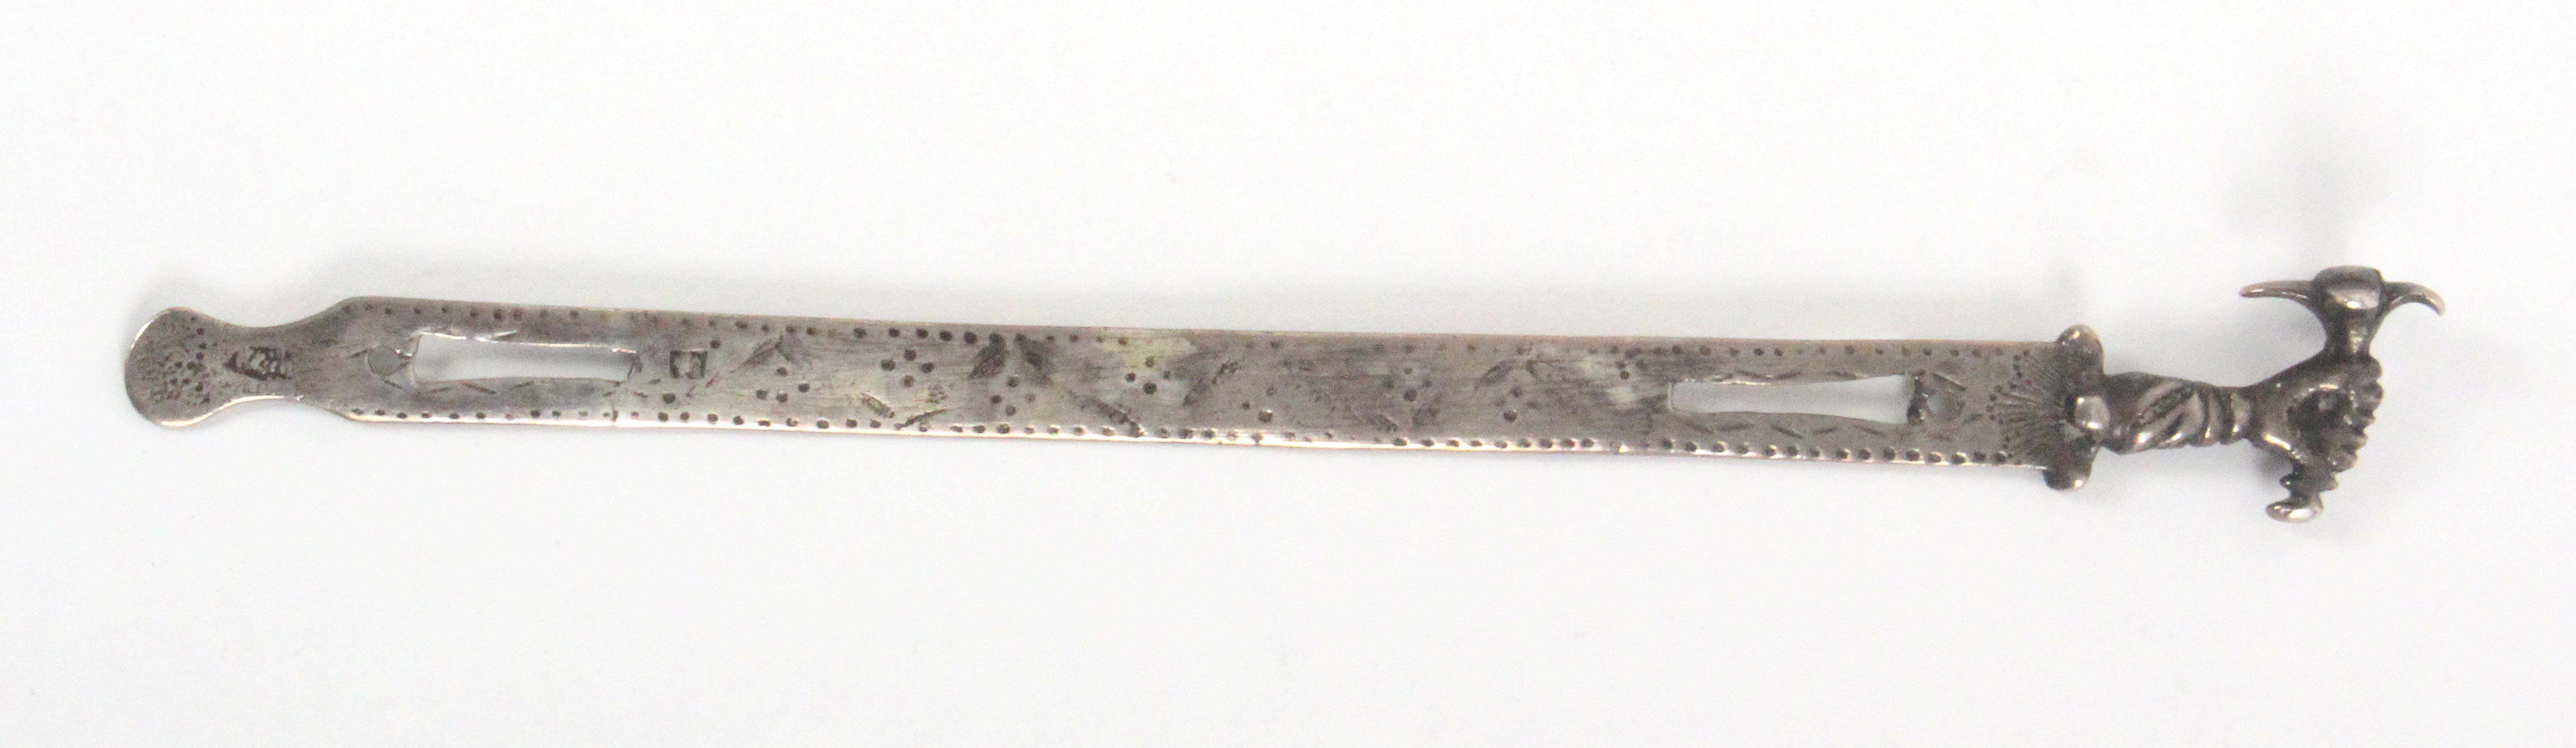 An 18th Century Dutch silver bodkin or ribbon threader, the teardrop end below a slot, the body with - Image 2 of 2